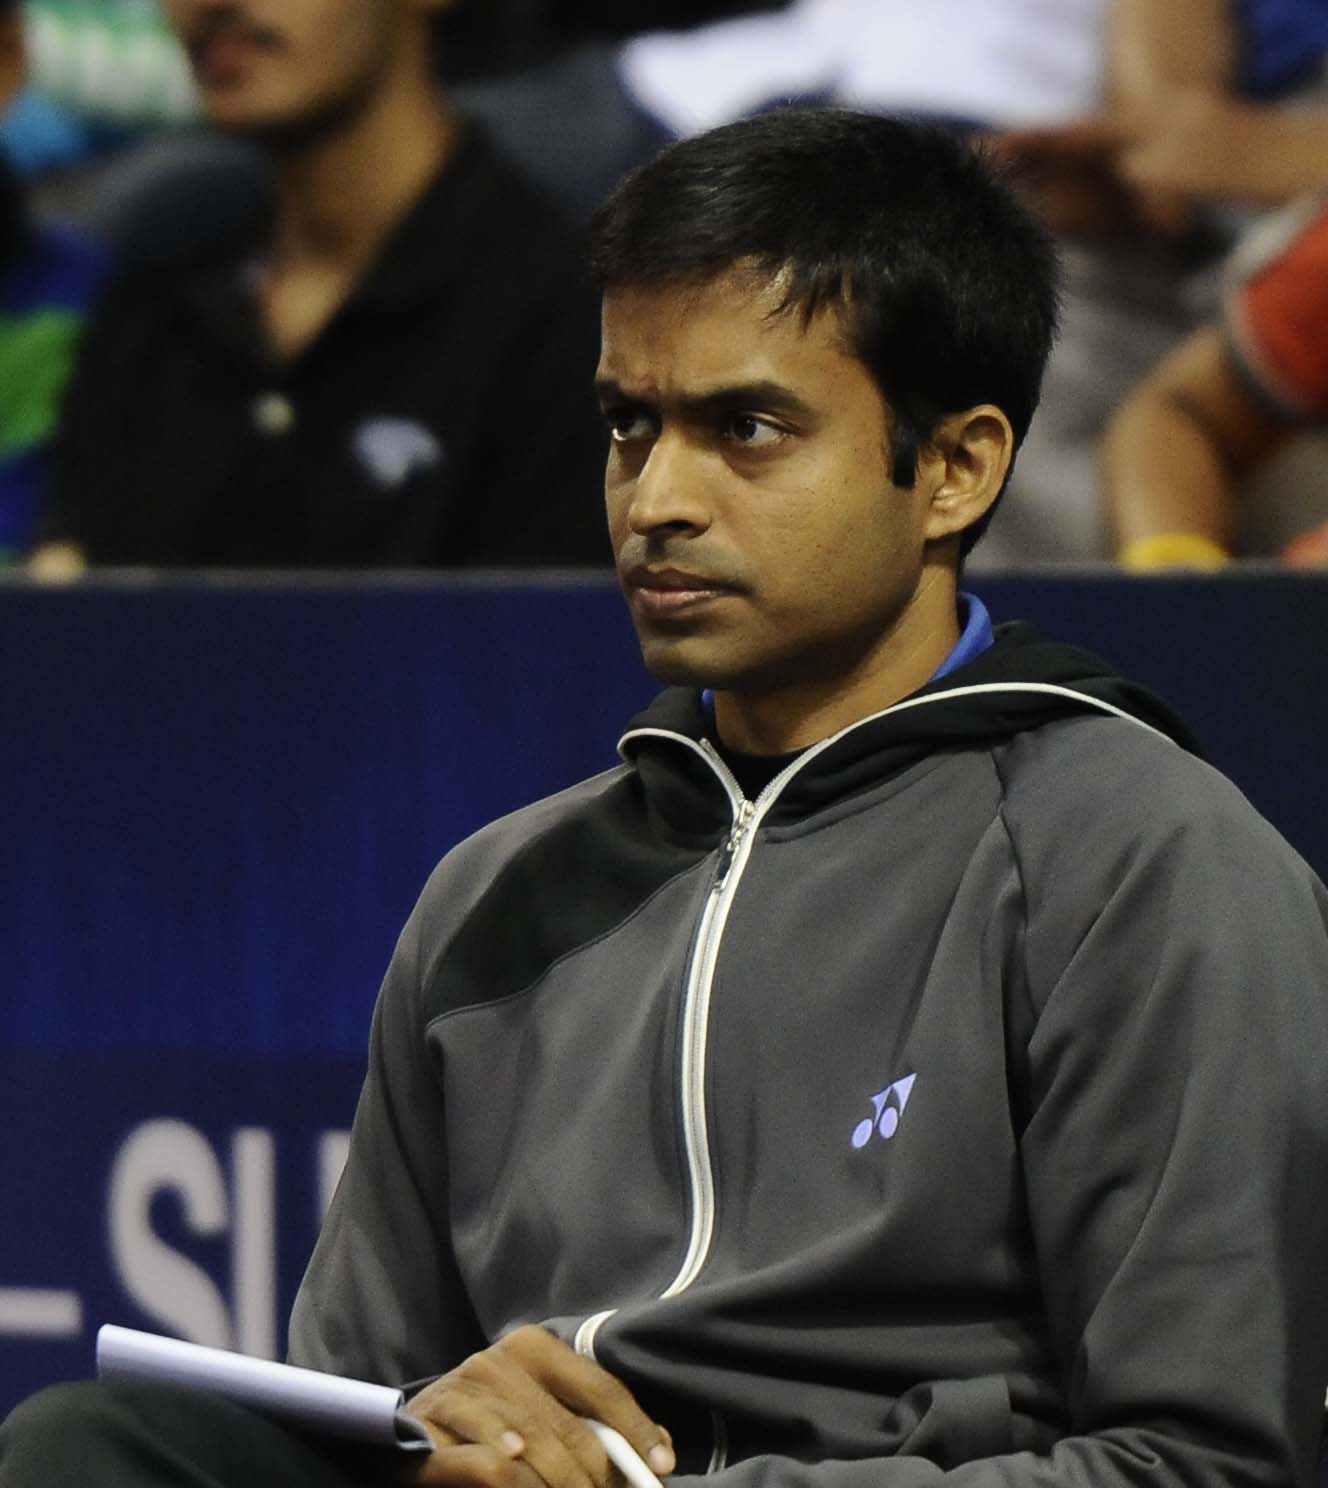 Gopichand : New service rules is advantageous for Indian players with short height.